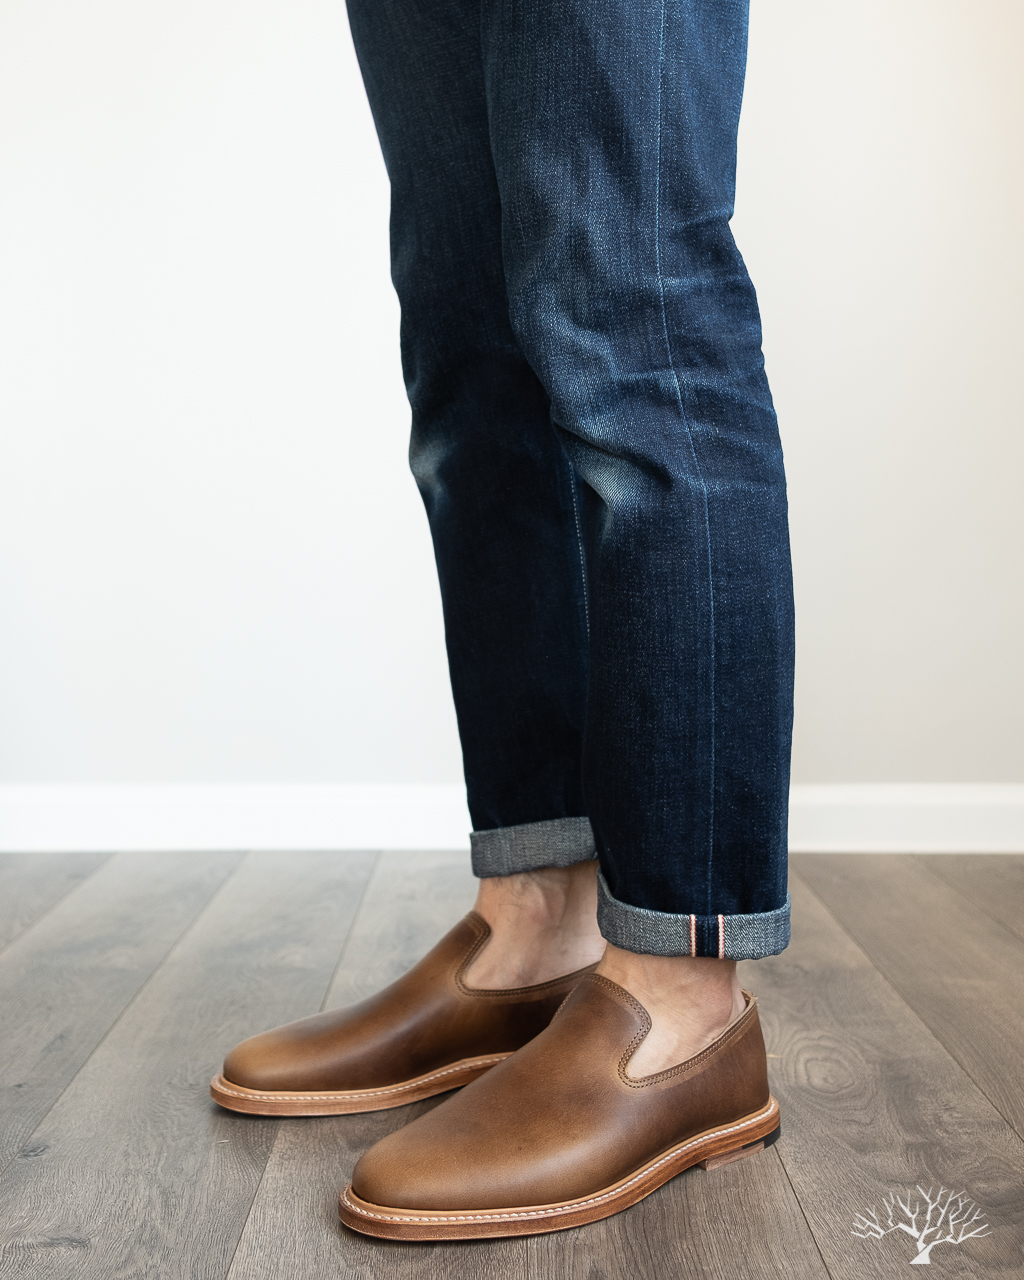 viberg camel oiled calf slippers styled with railcar denim